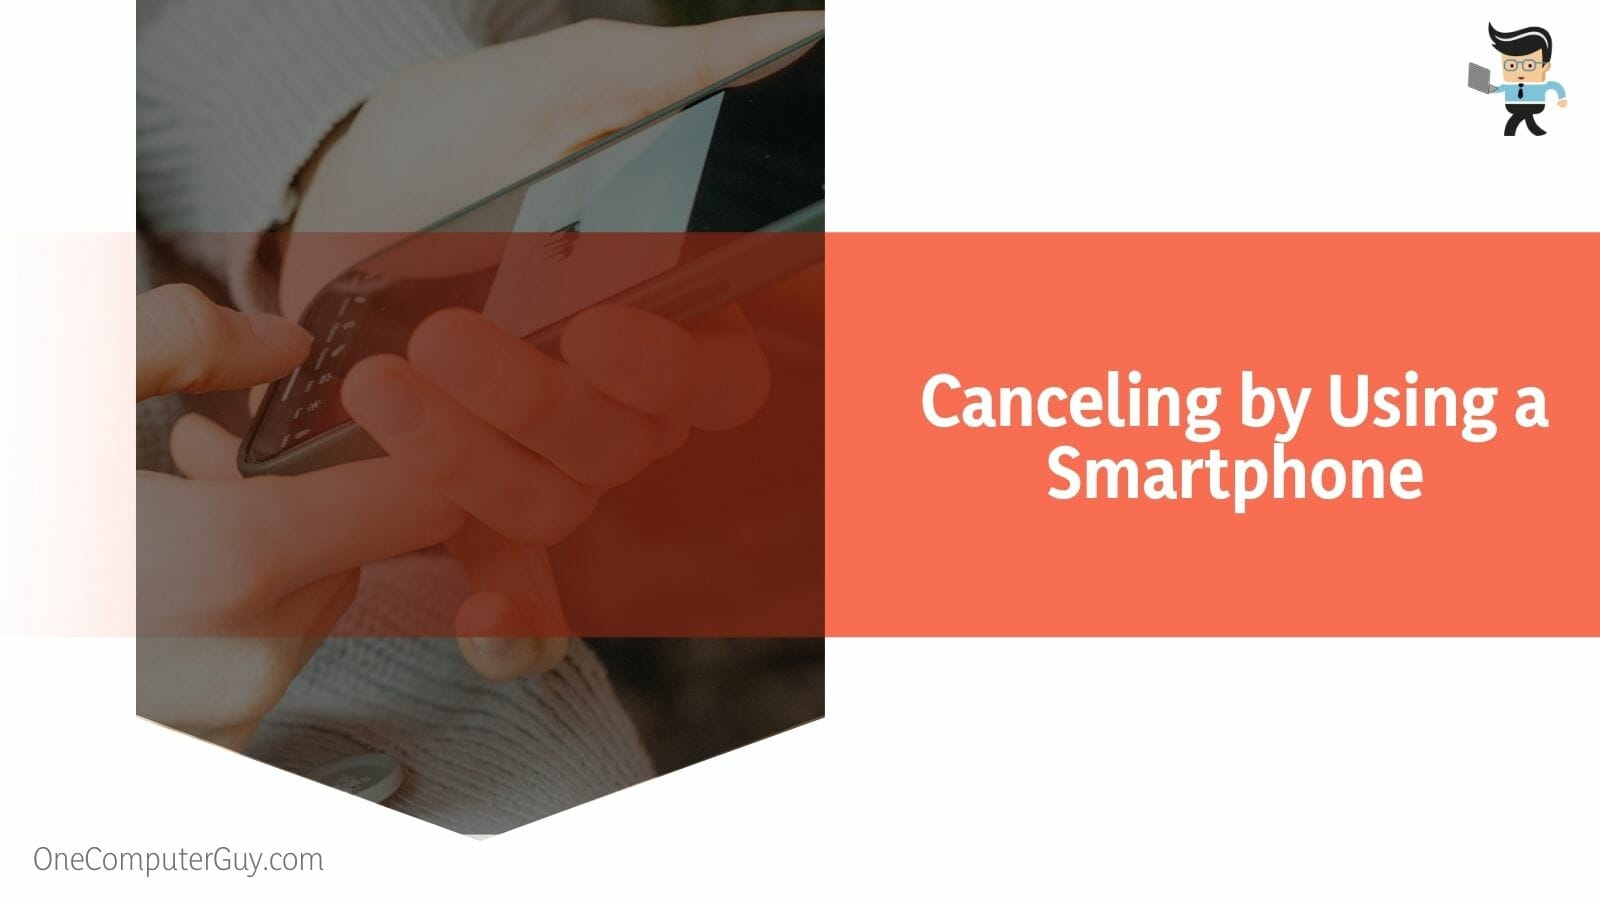 Canceling by Using a Smartphone